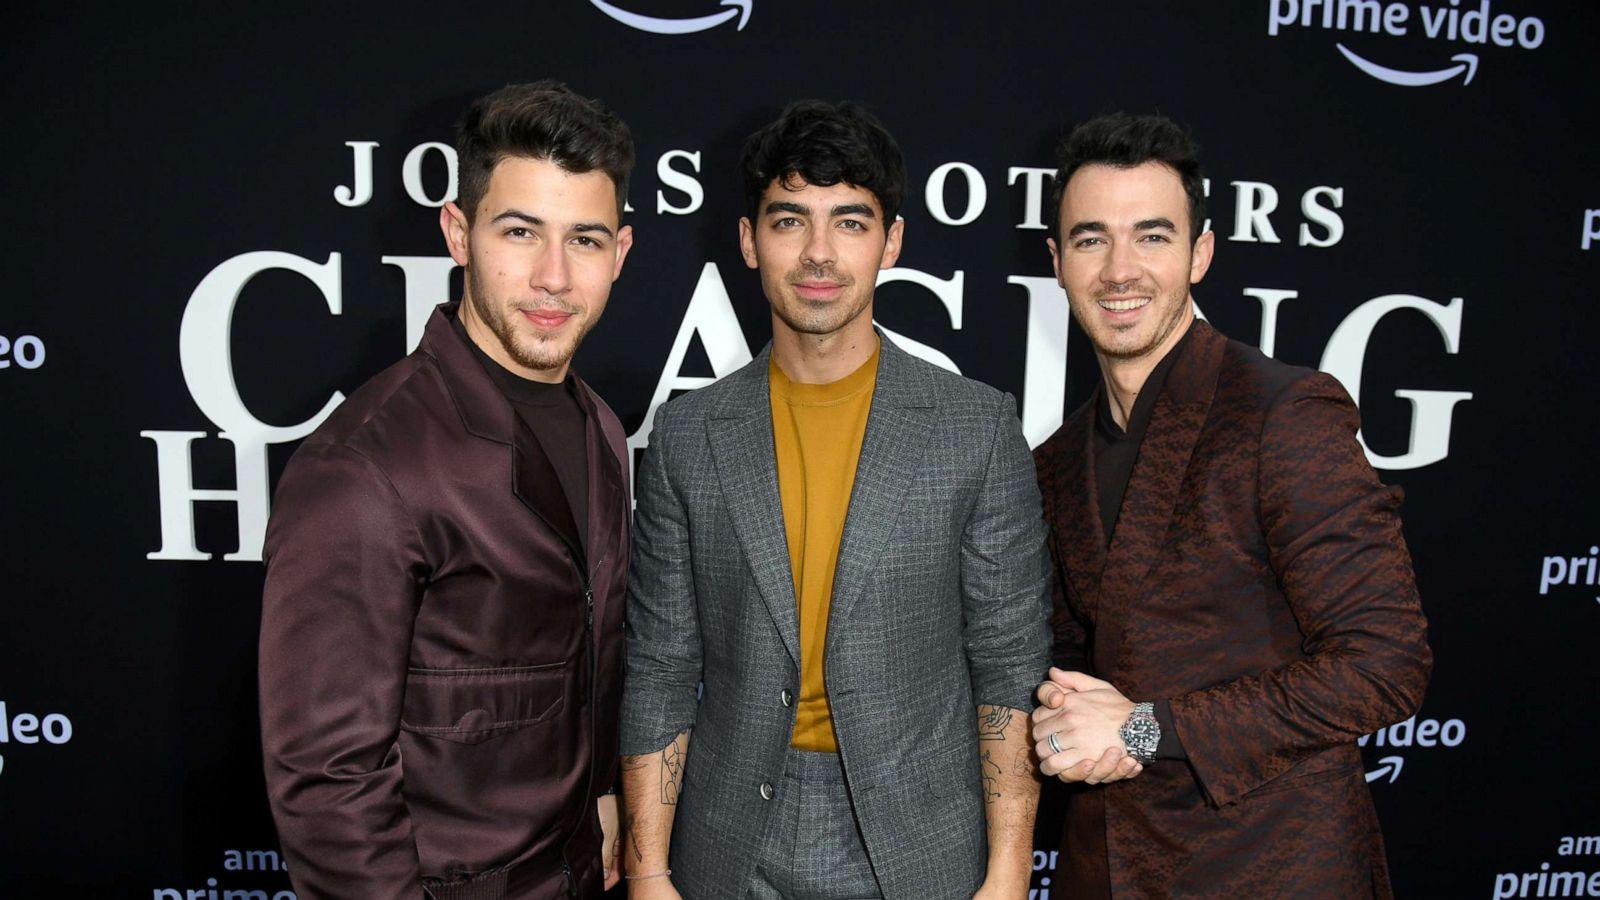 Jonas Brothers documentary 'Chasing Happiness' is out